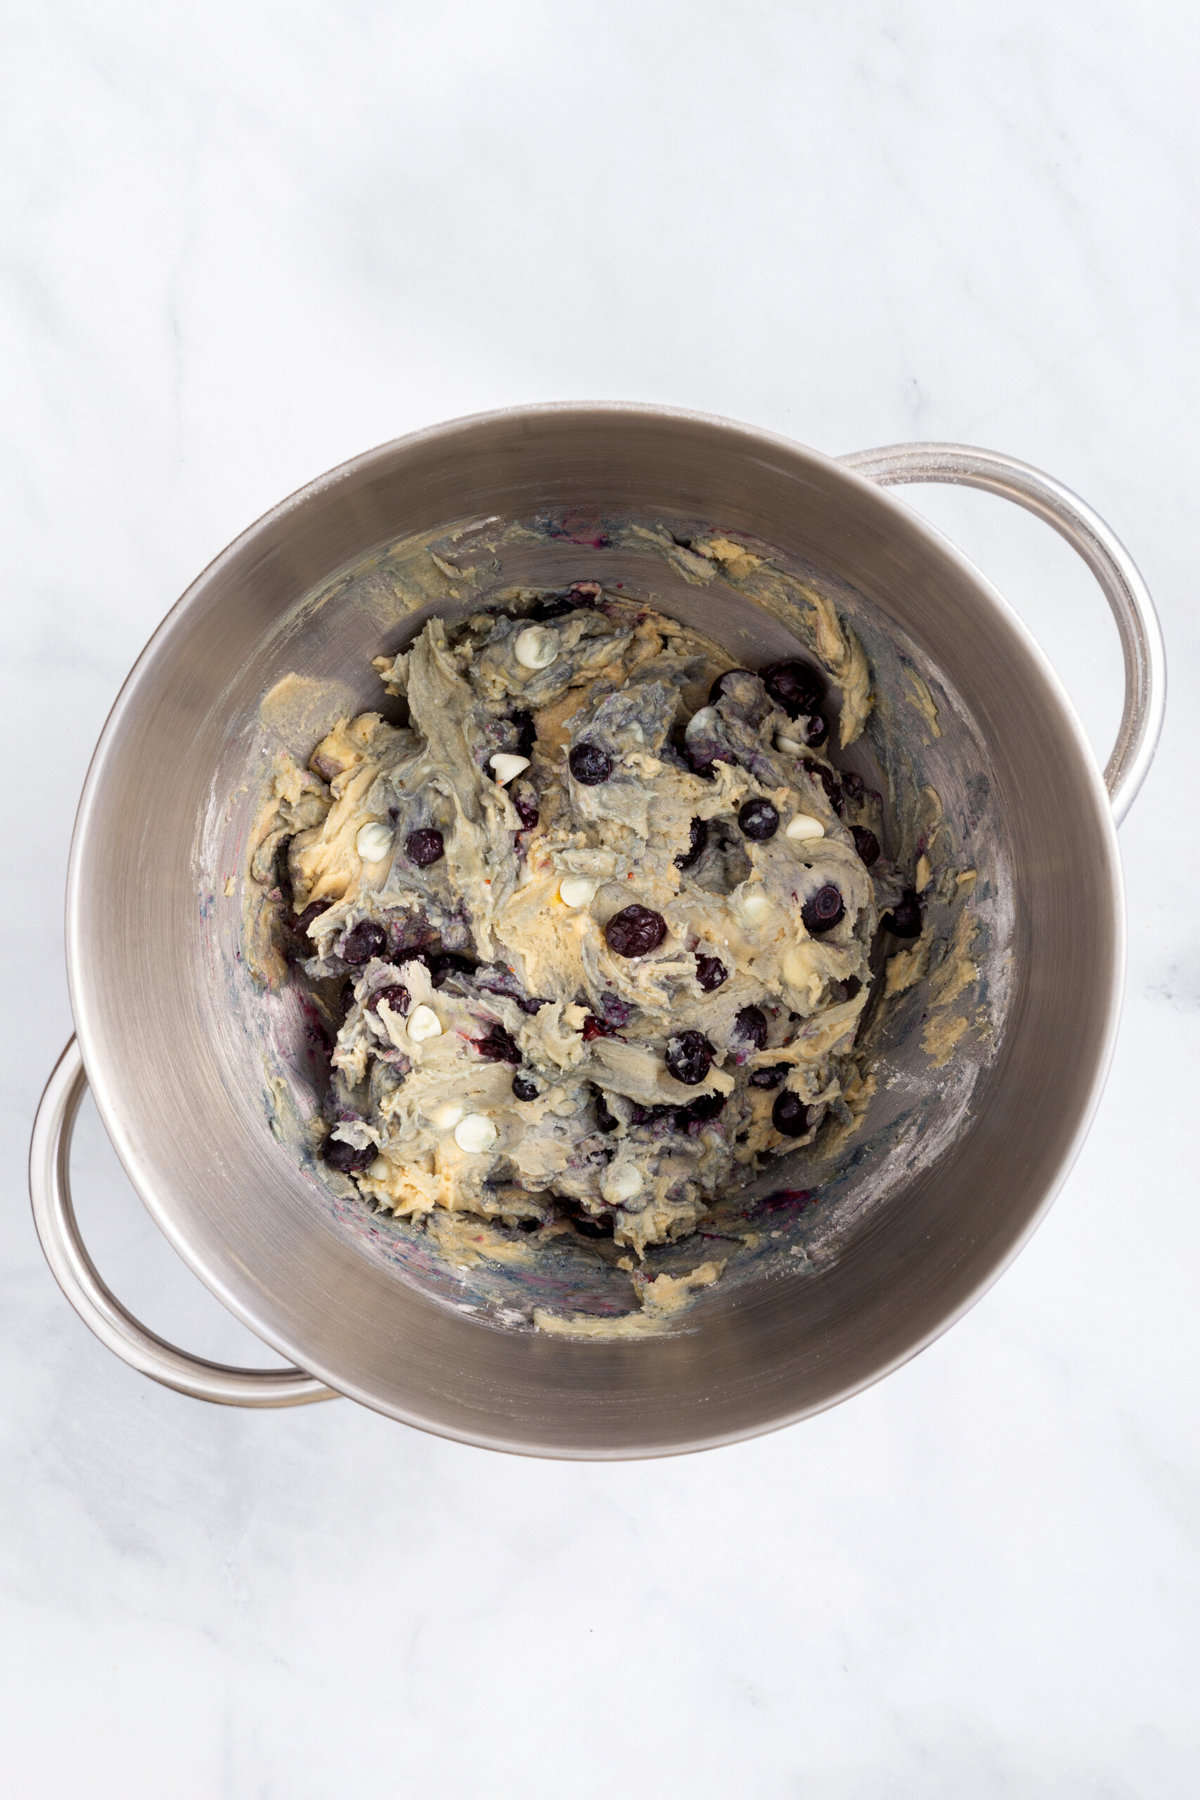 stainless steel mixing bowl with blueberry cookie dough batter.